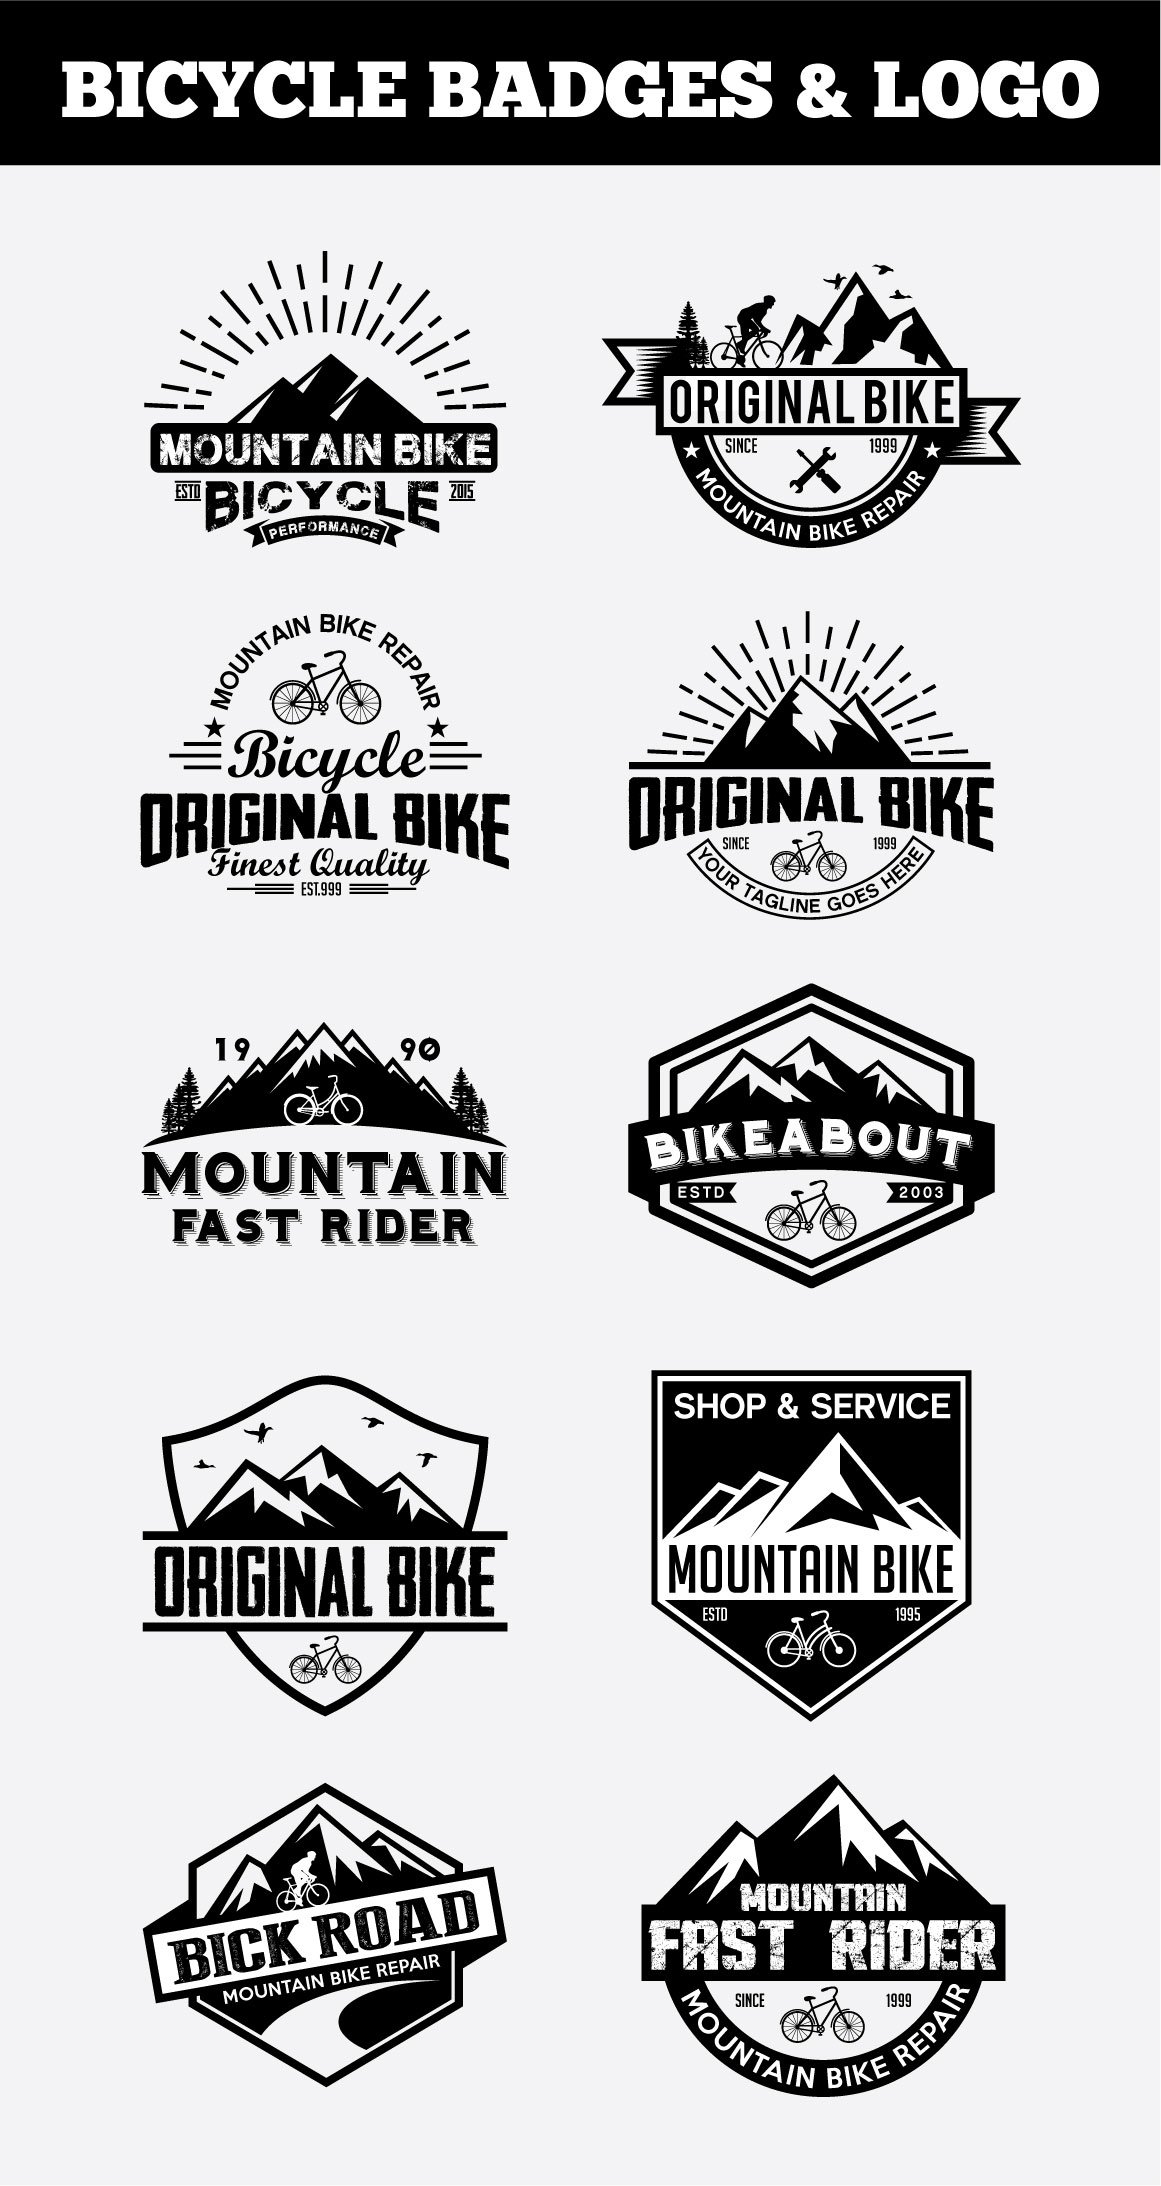 Sport Bicycle Badges & LogoVol2 cover image.